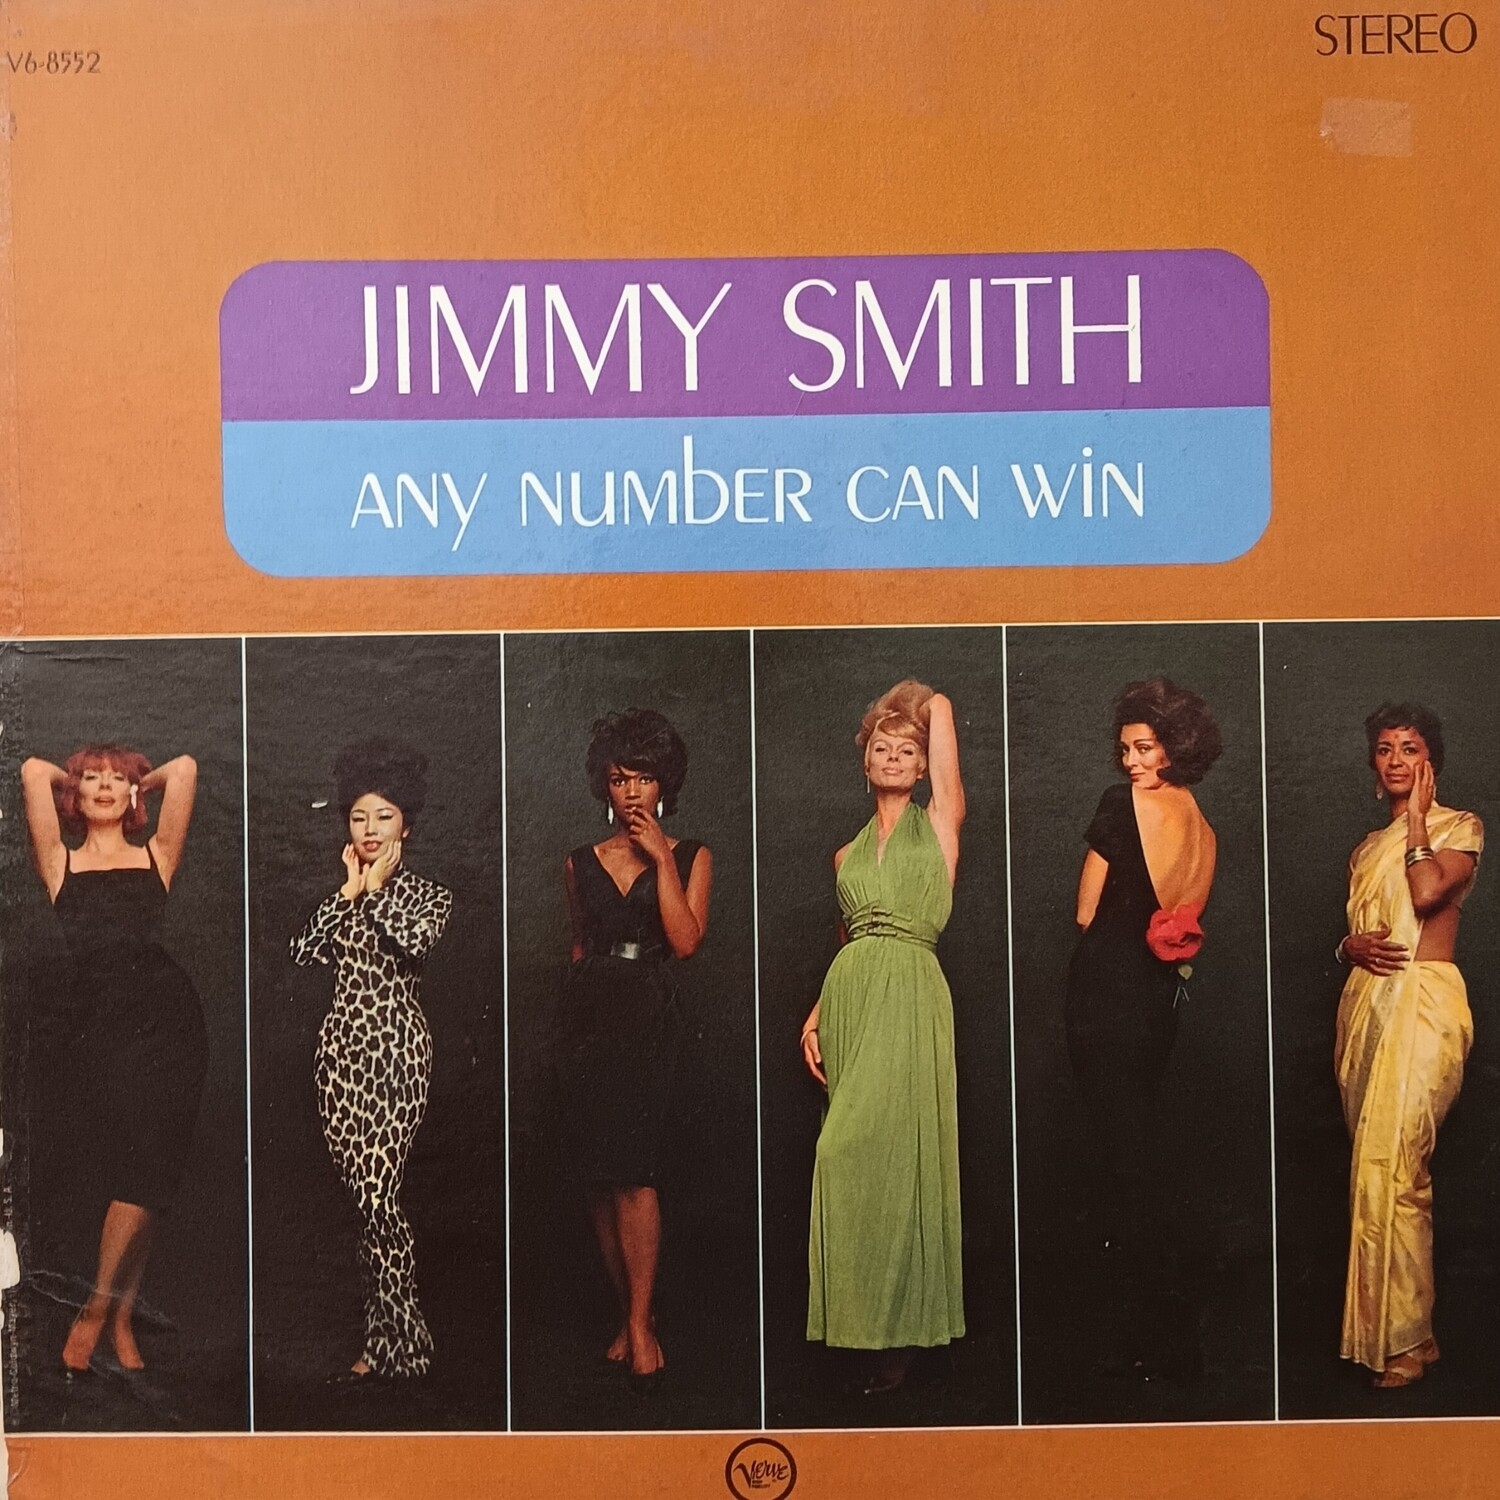 JIMMY SMITH - Any number can win